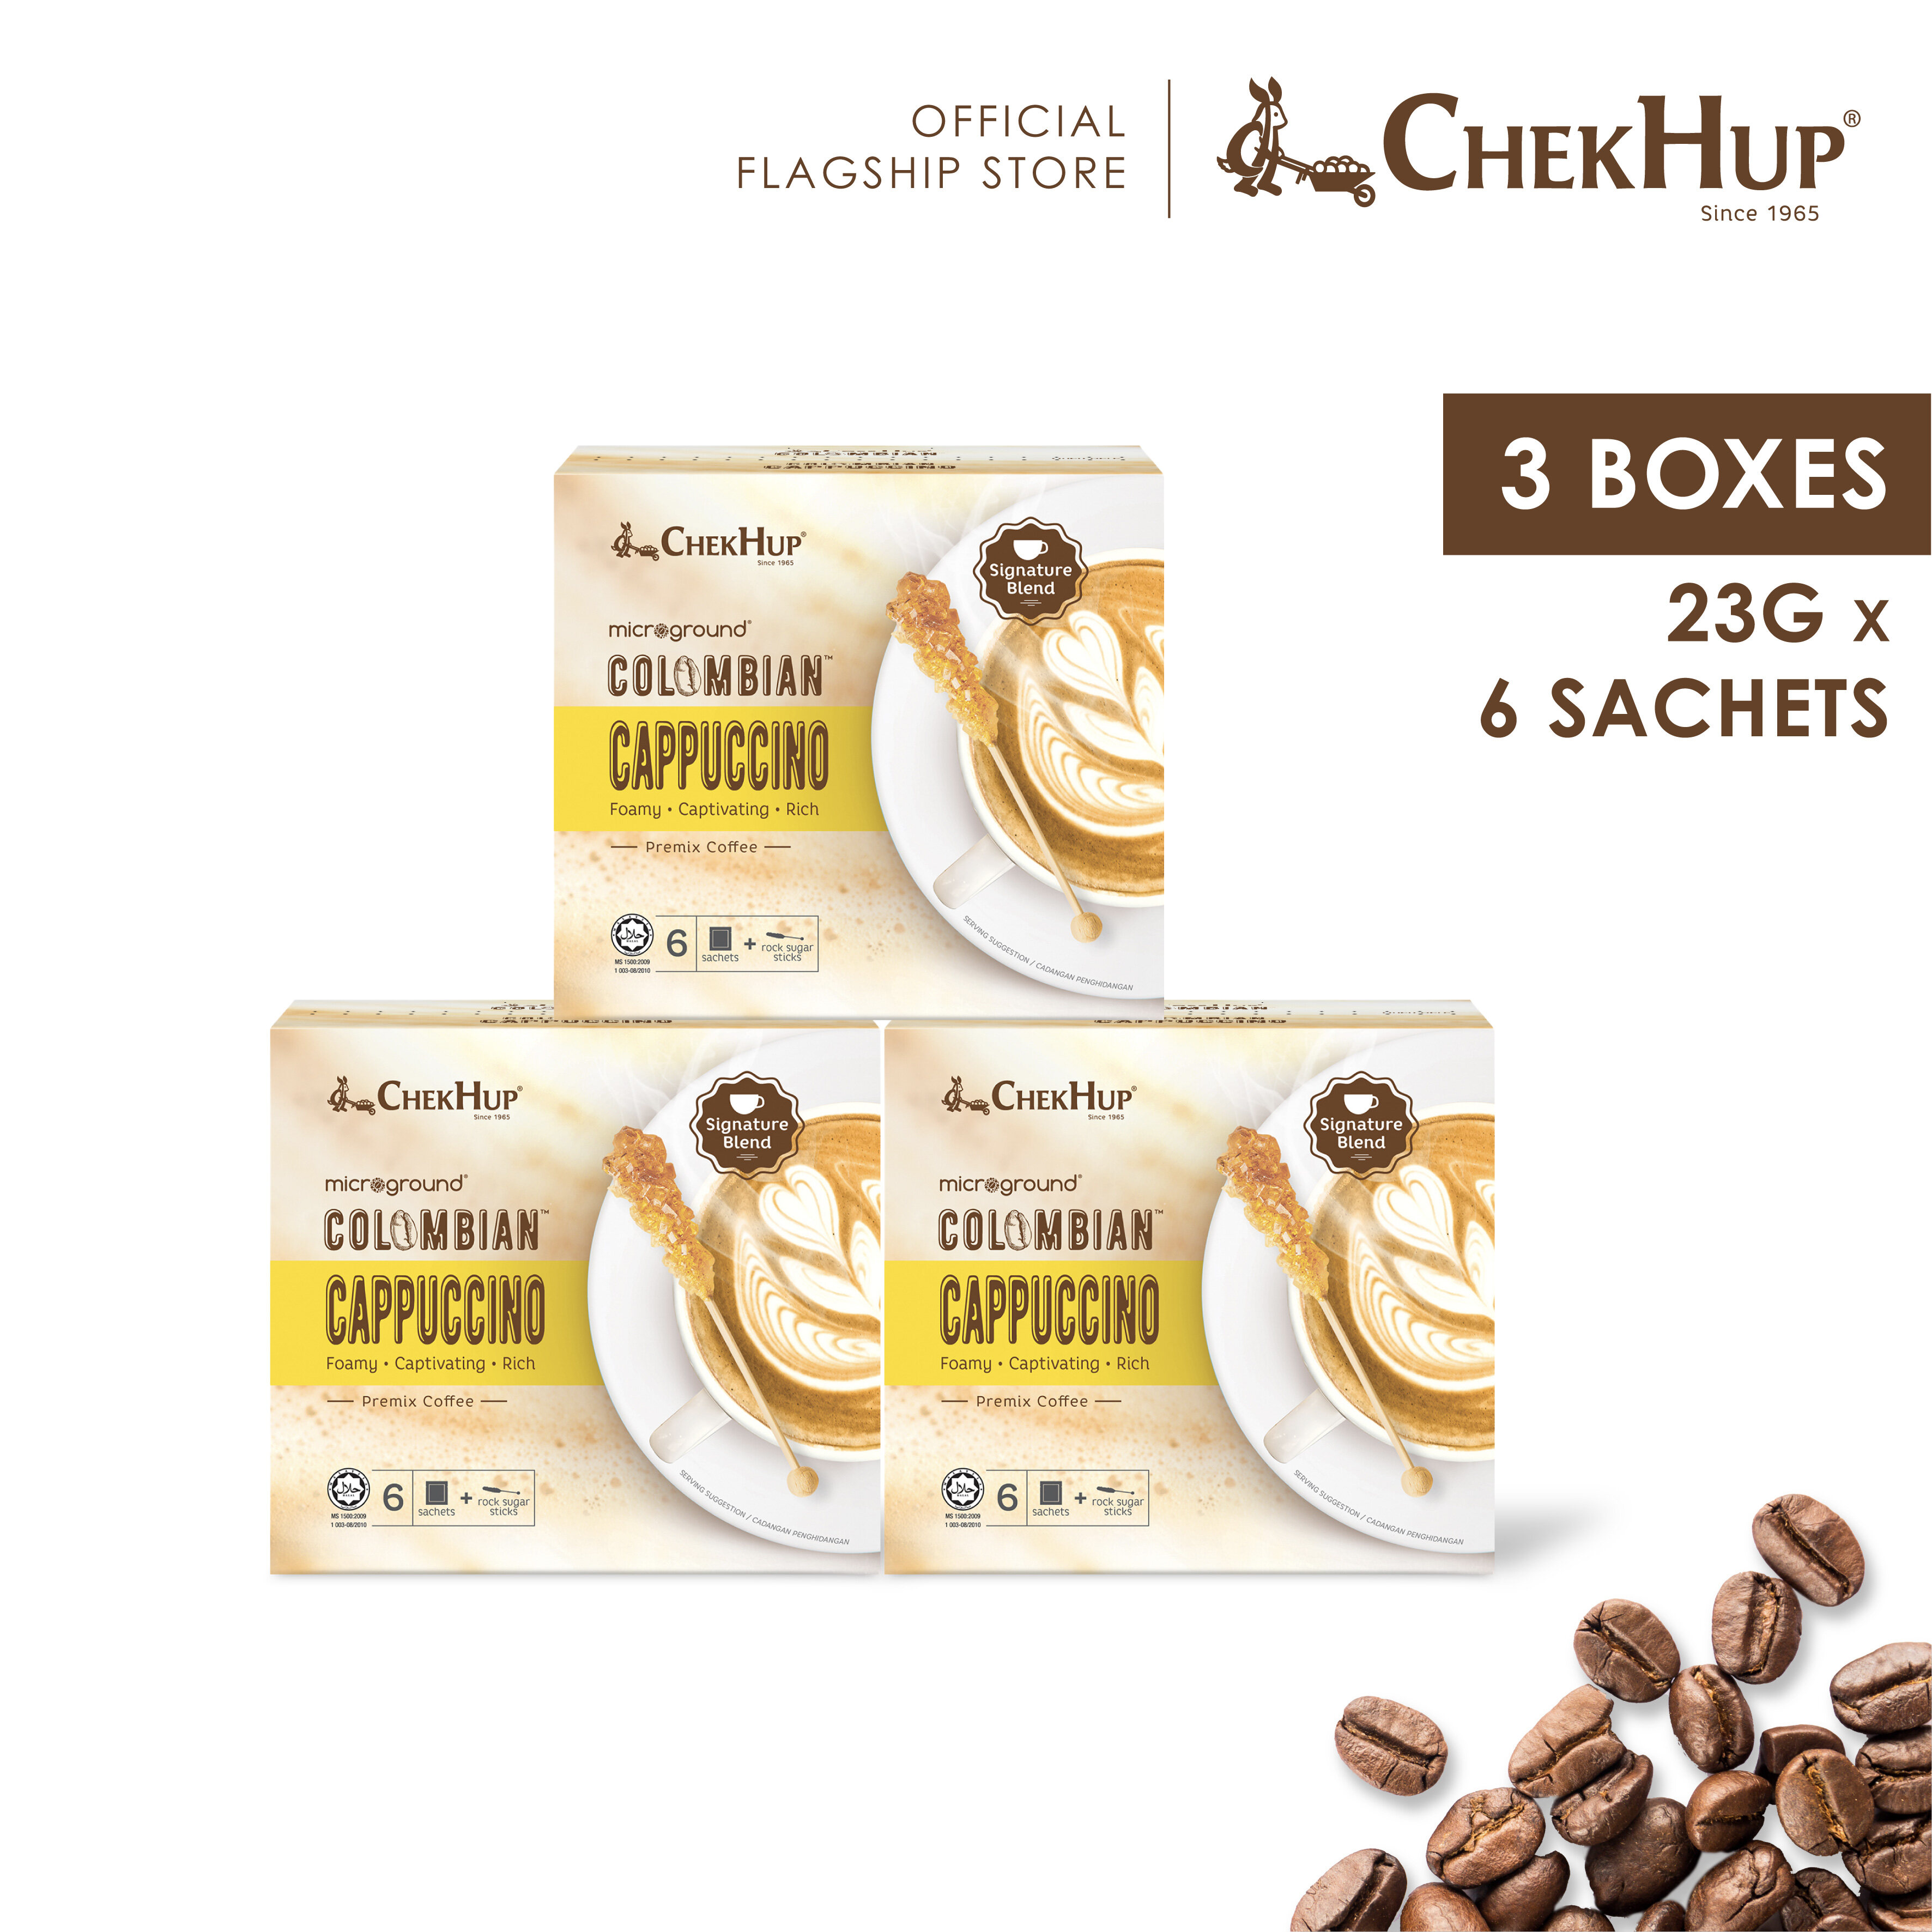 Chek Hup Microground Colombian Cappuccino (23g x 6s) [Bundle of 3]